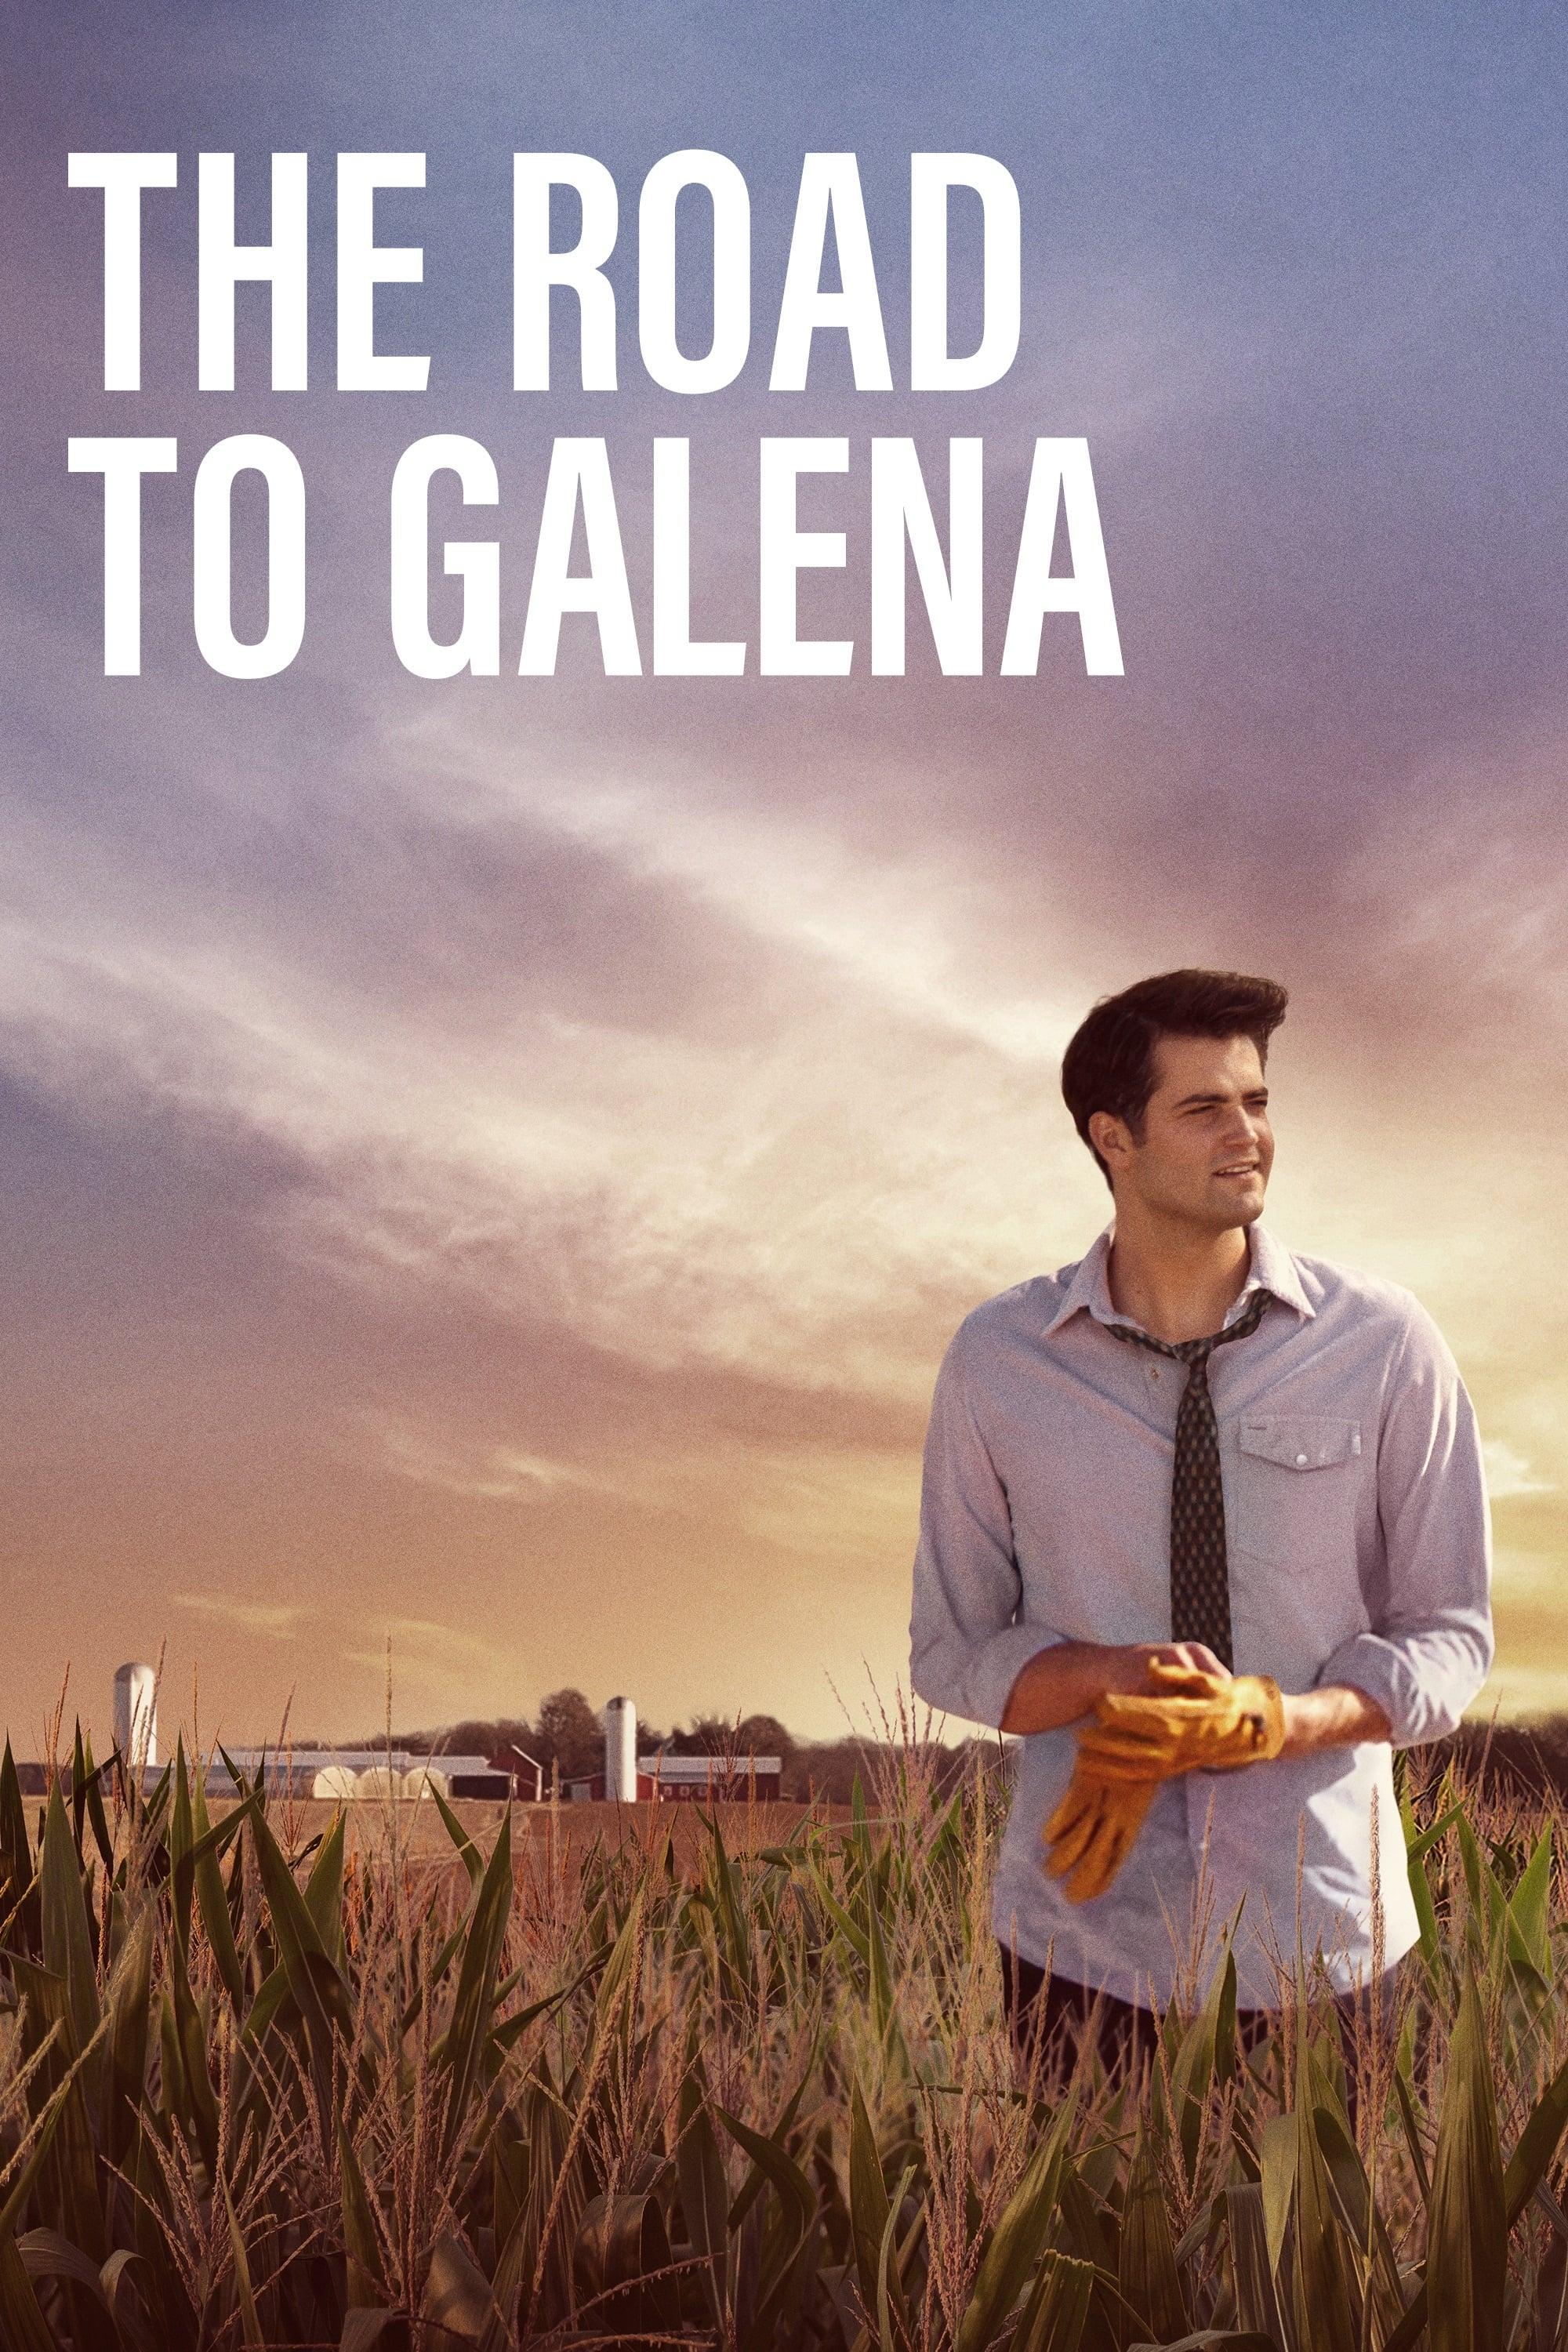 The Road to Galena poster